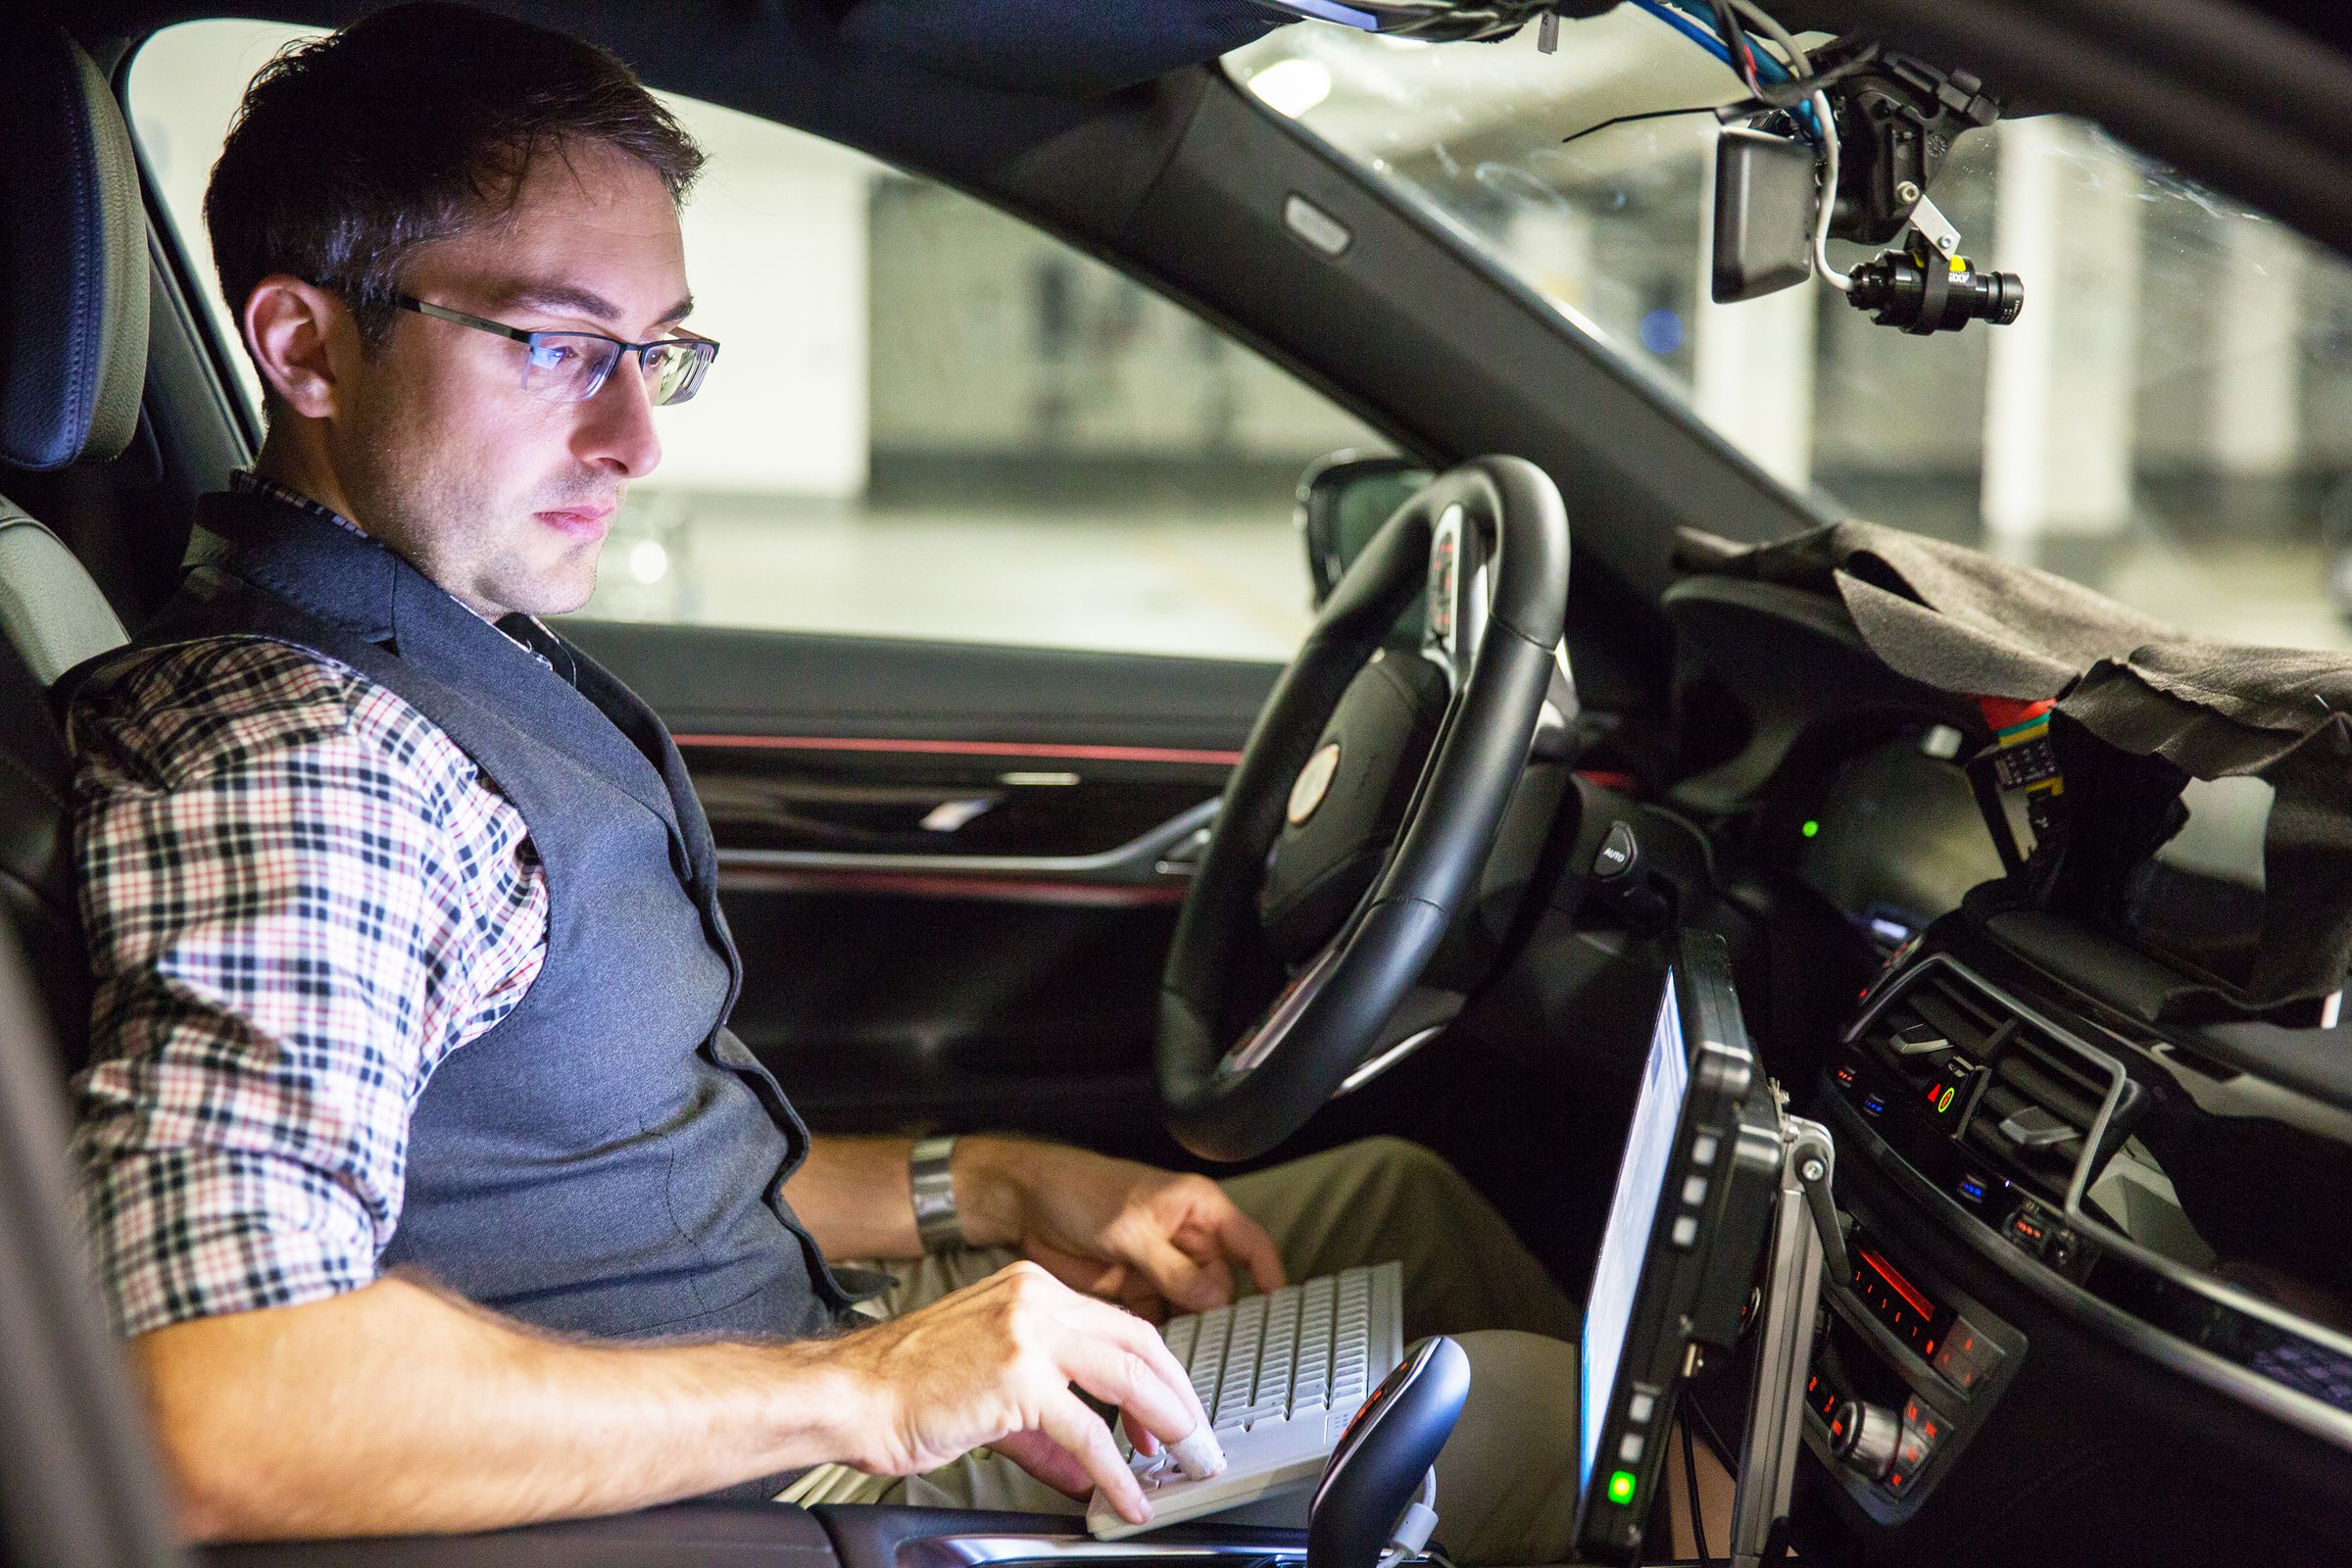 BMW engineer, André Mueller, tests autonomous driving technology in a BMW 7 series sedan.